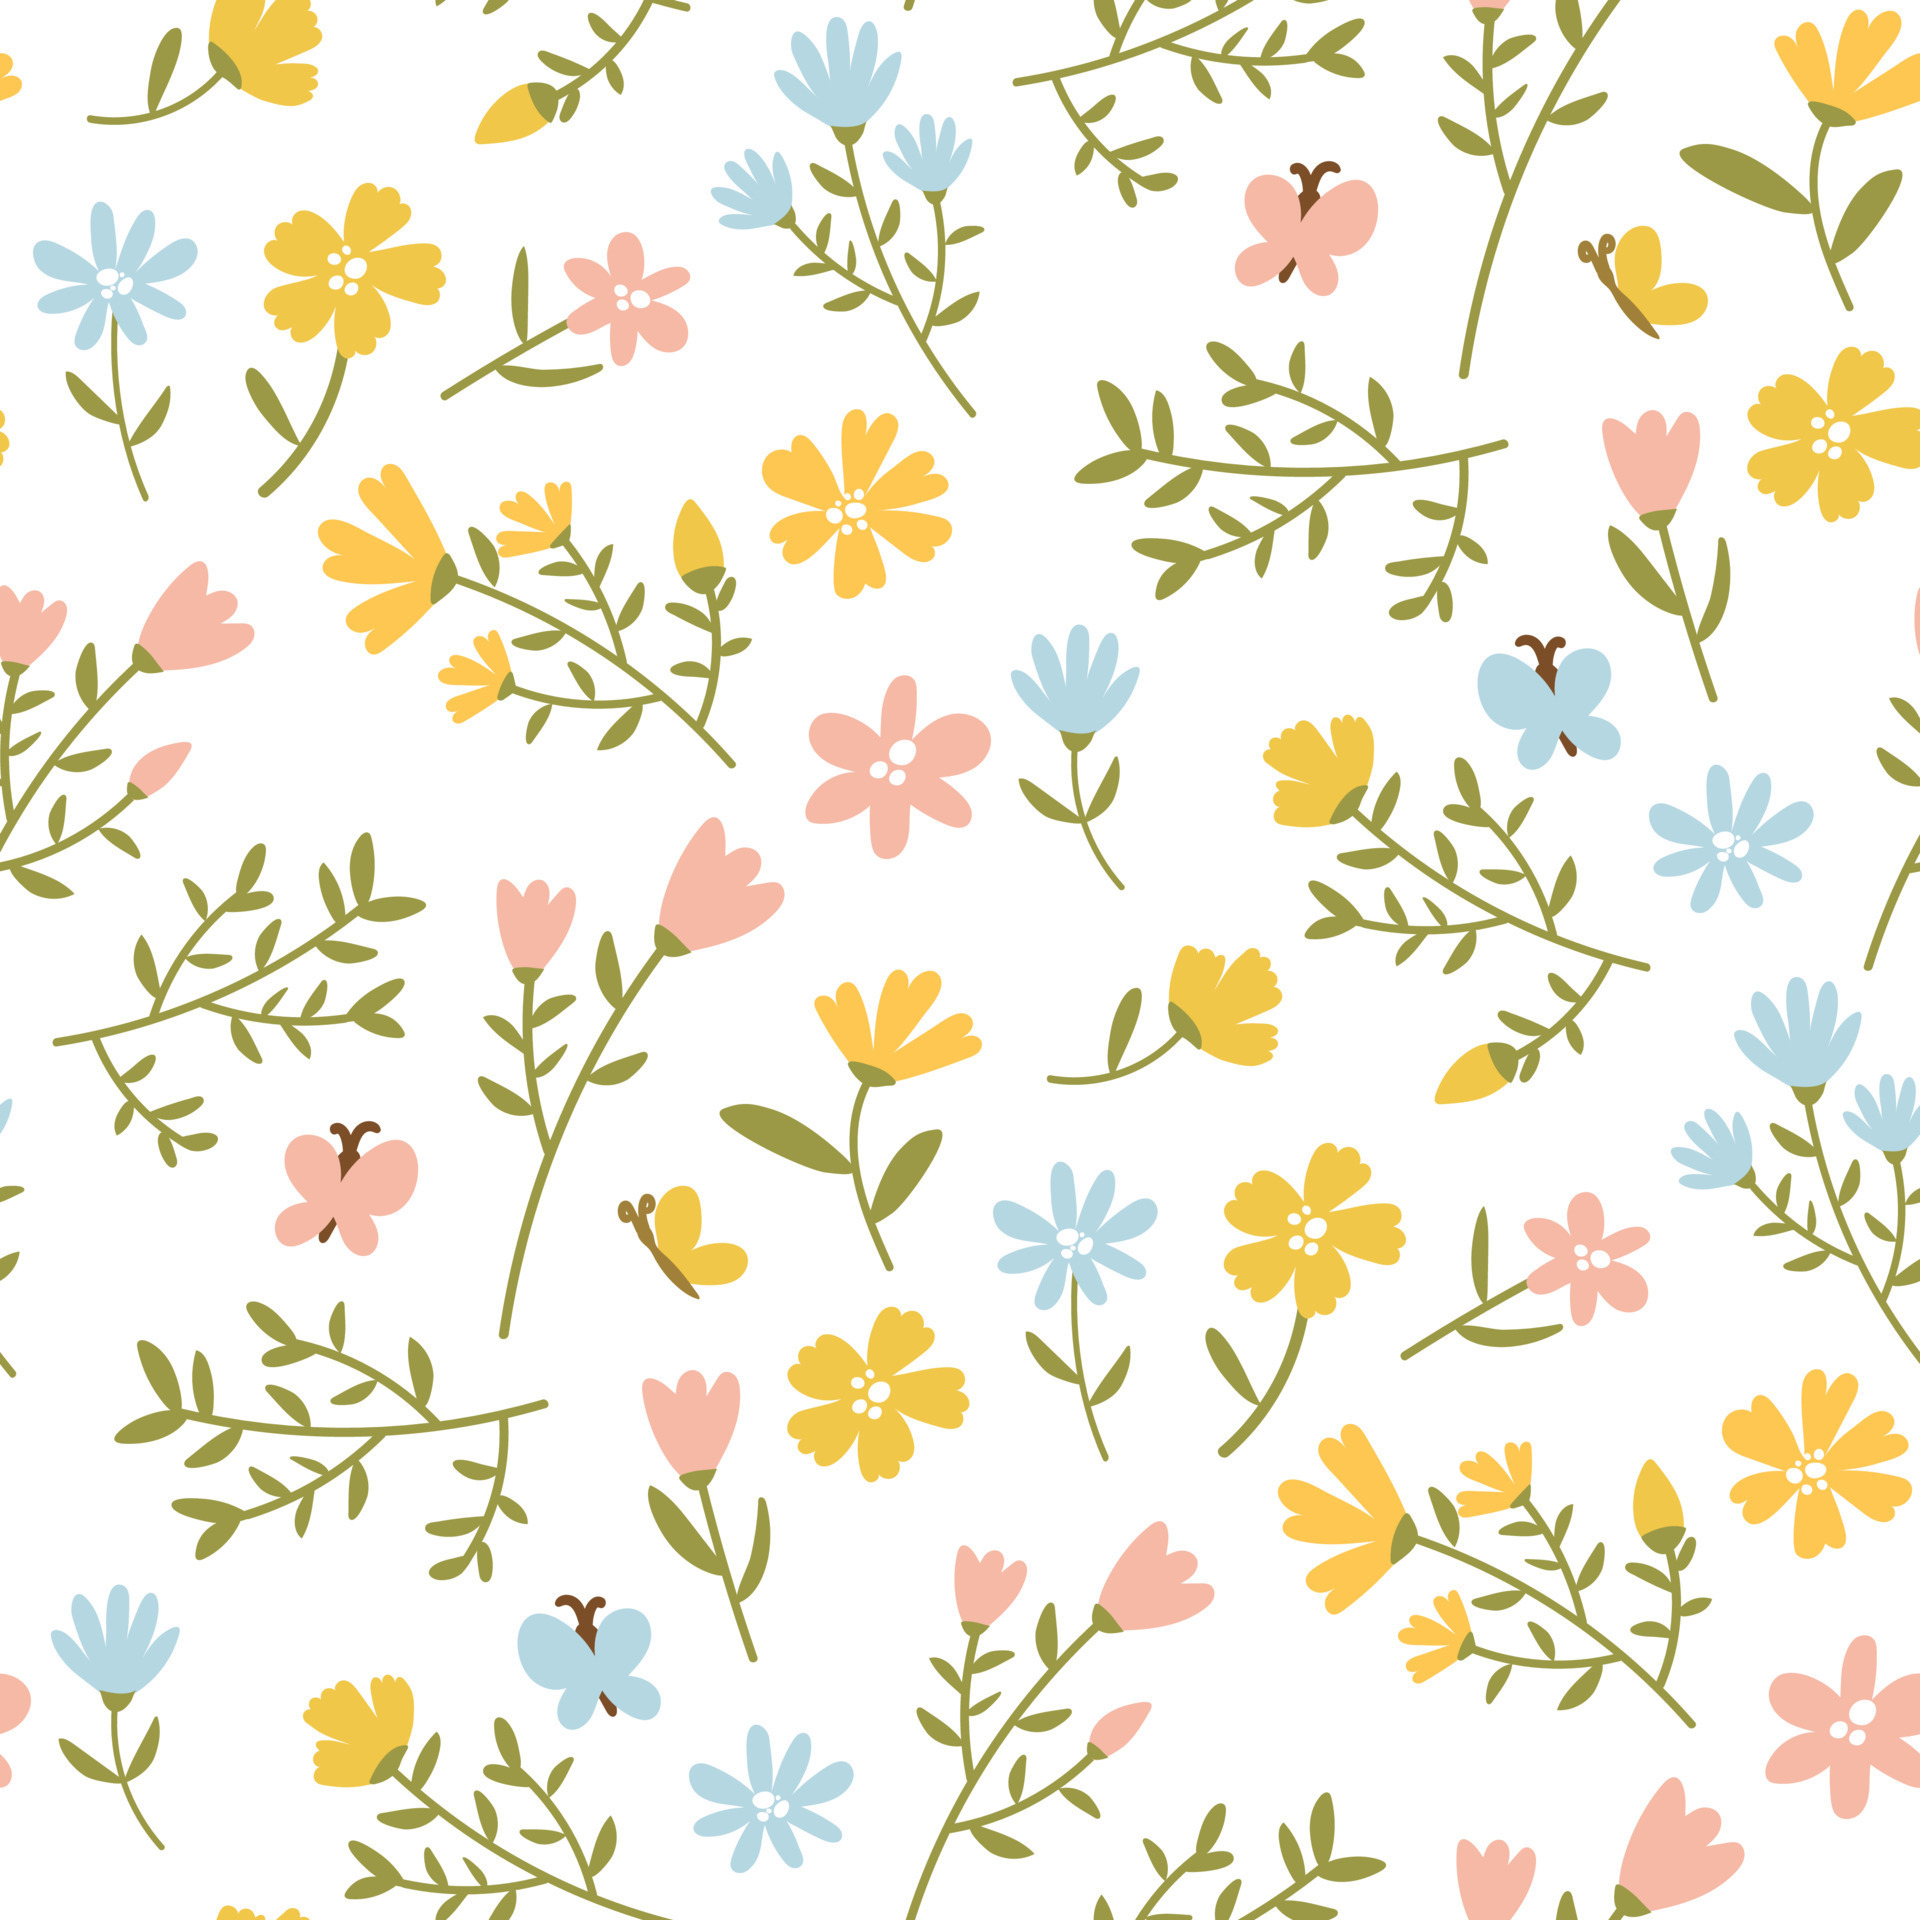 Delicate Ditsy Floral Seamless Vector Design With Light